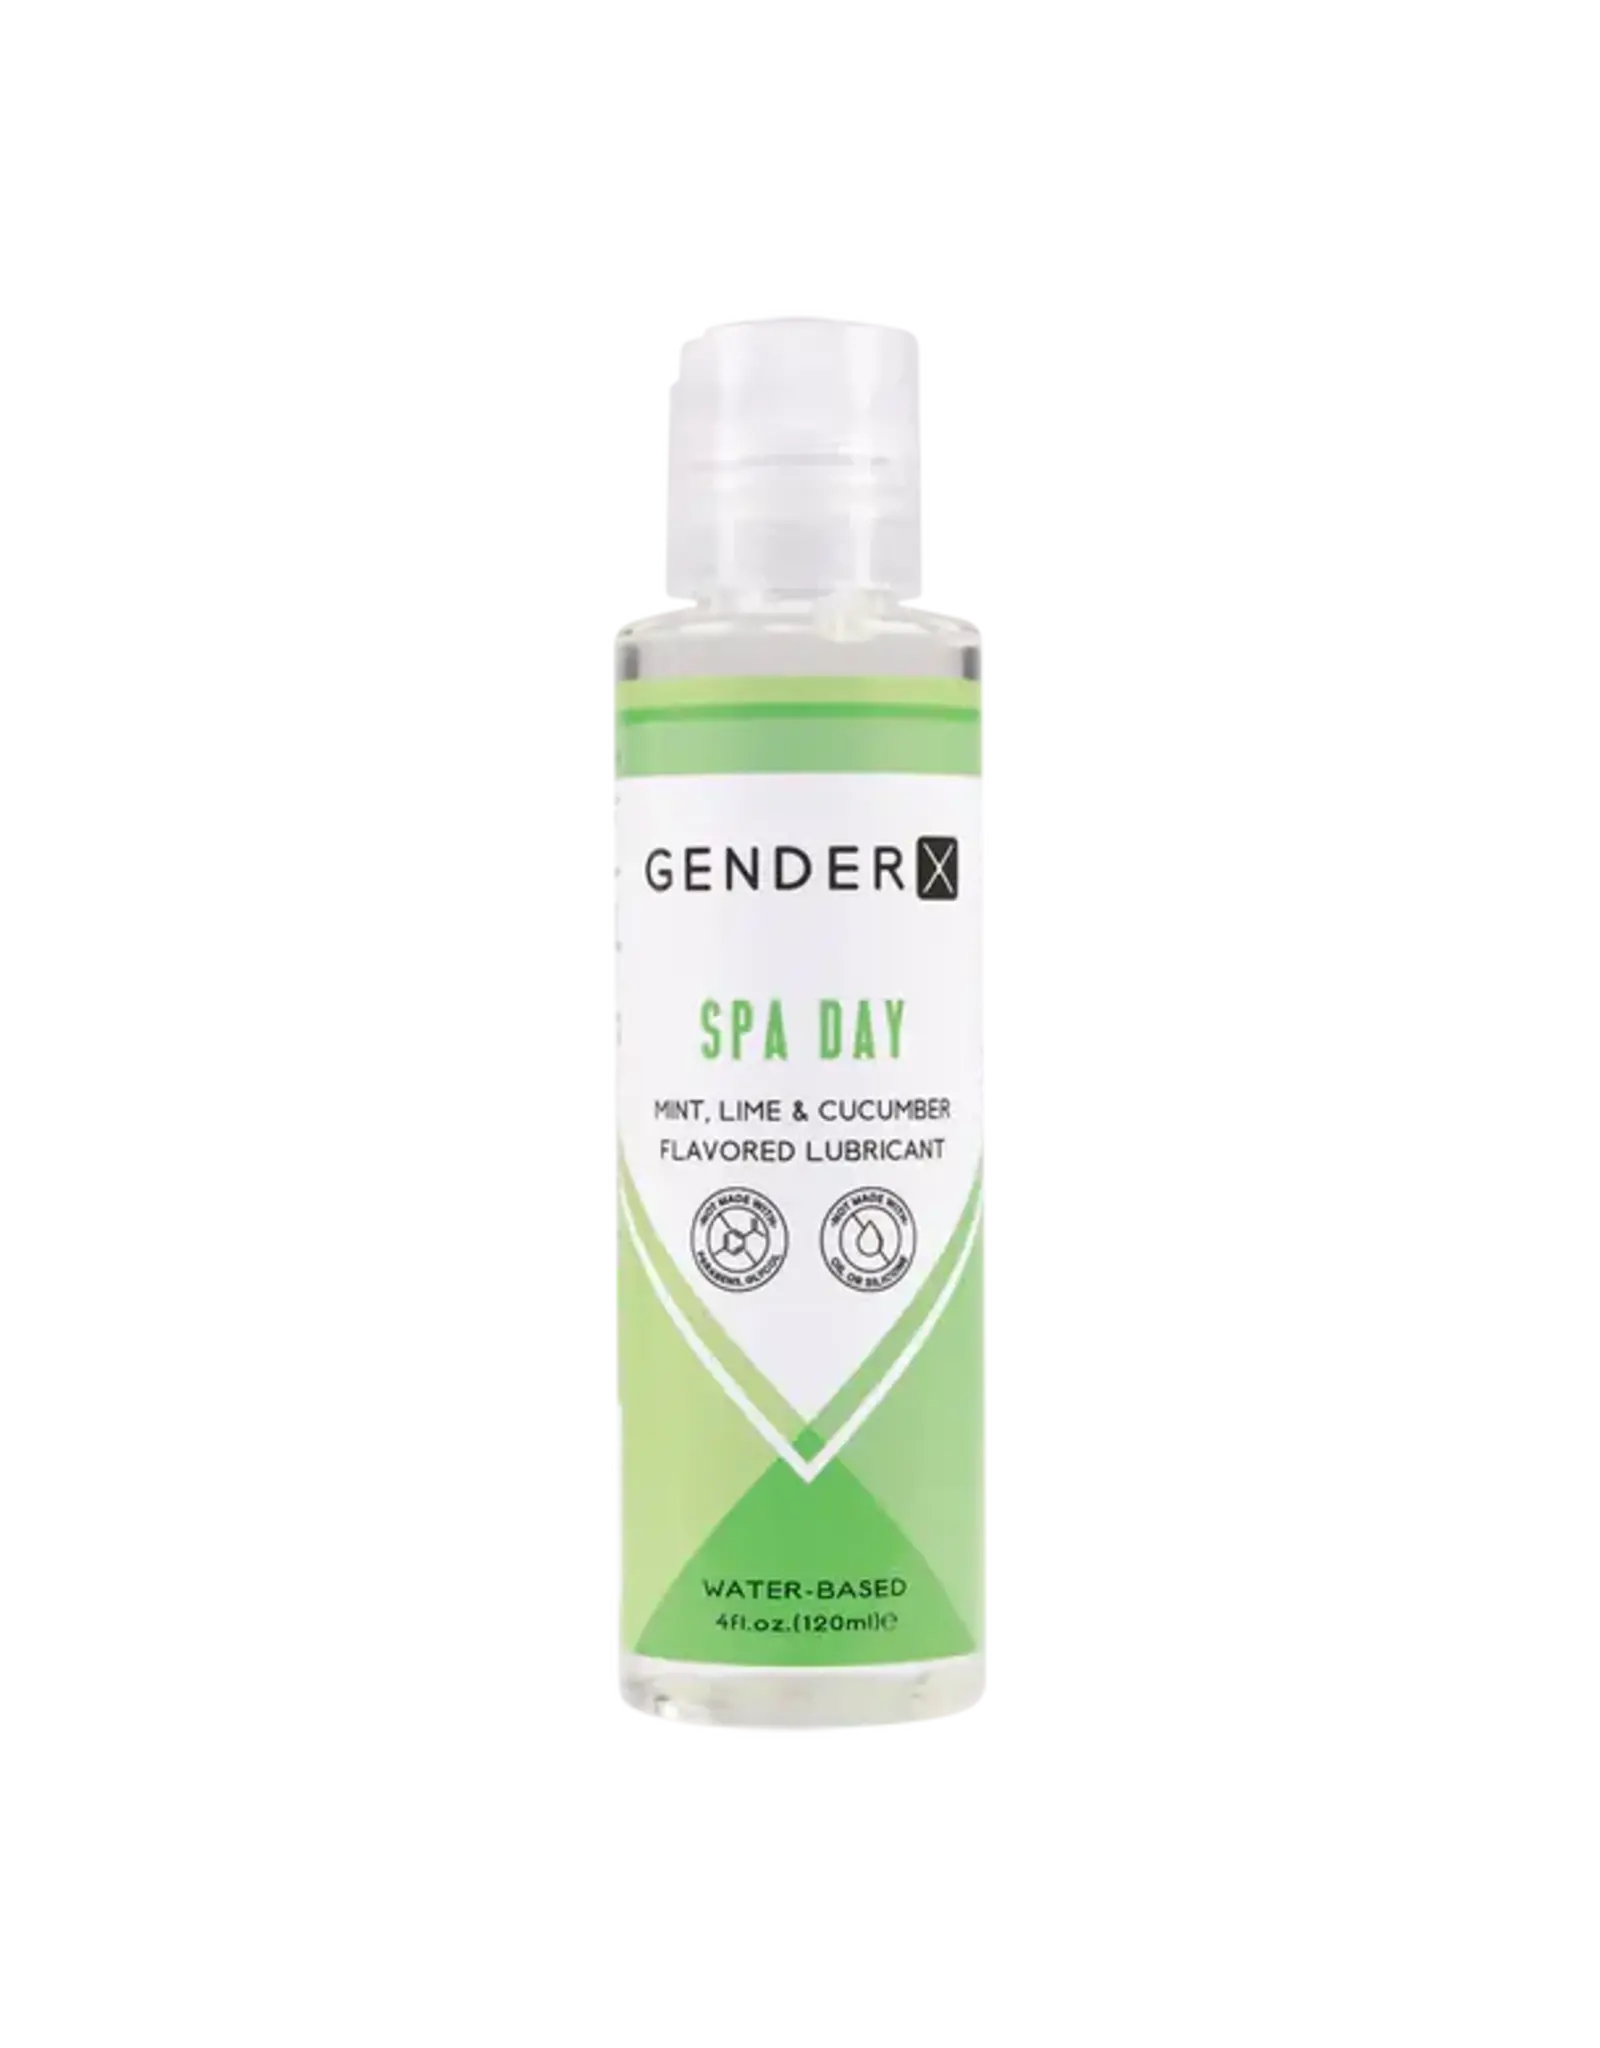 Gender X Gender X - Spa Day - Mint, Lime & Cucumber Flavored Lubricant - 2 oz